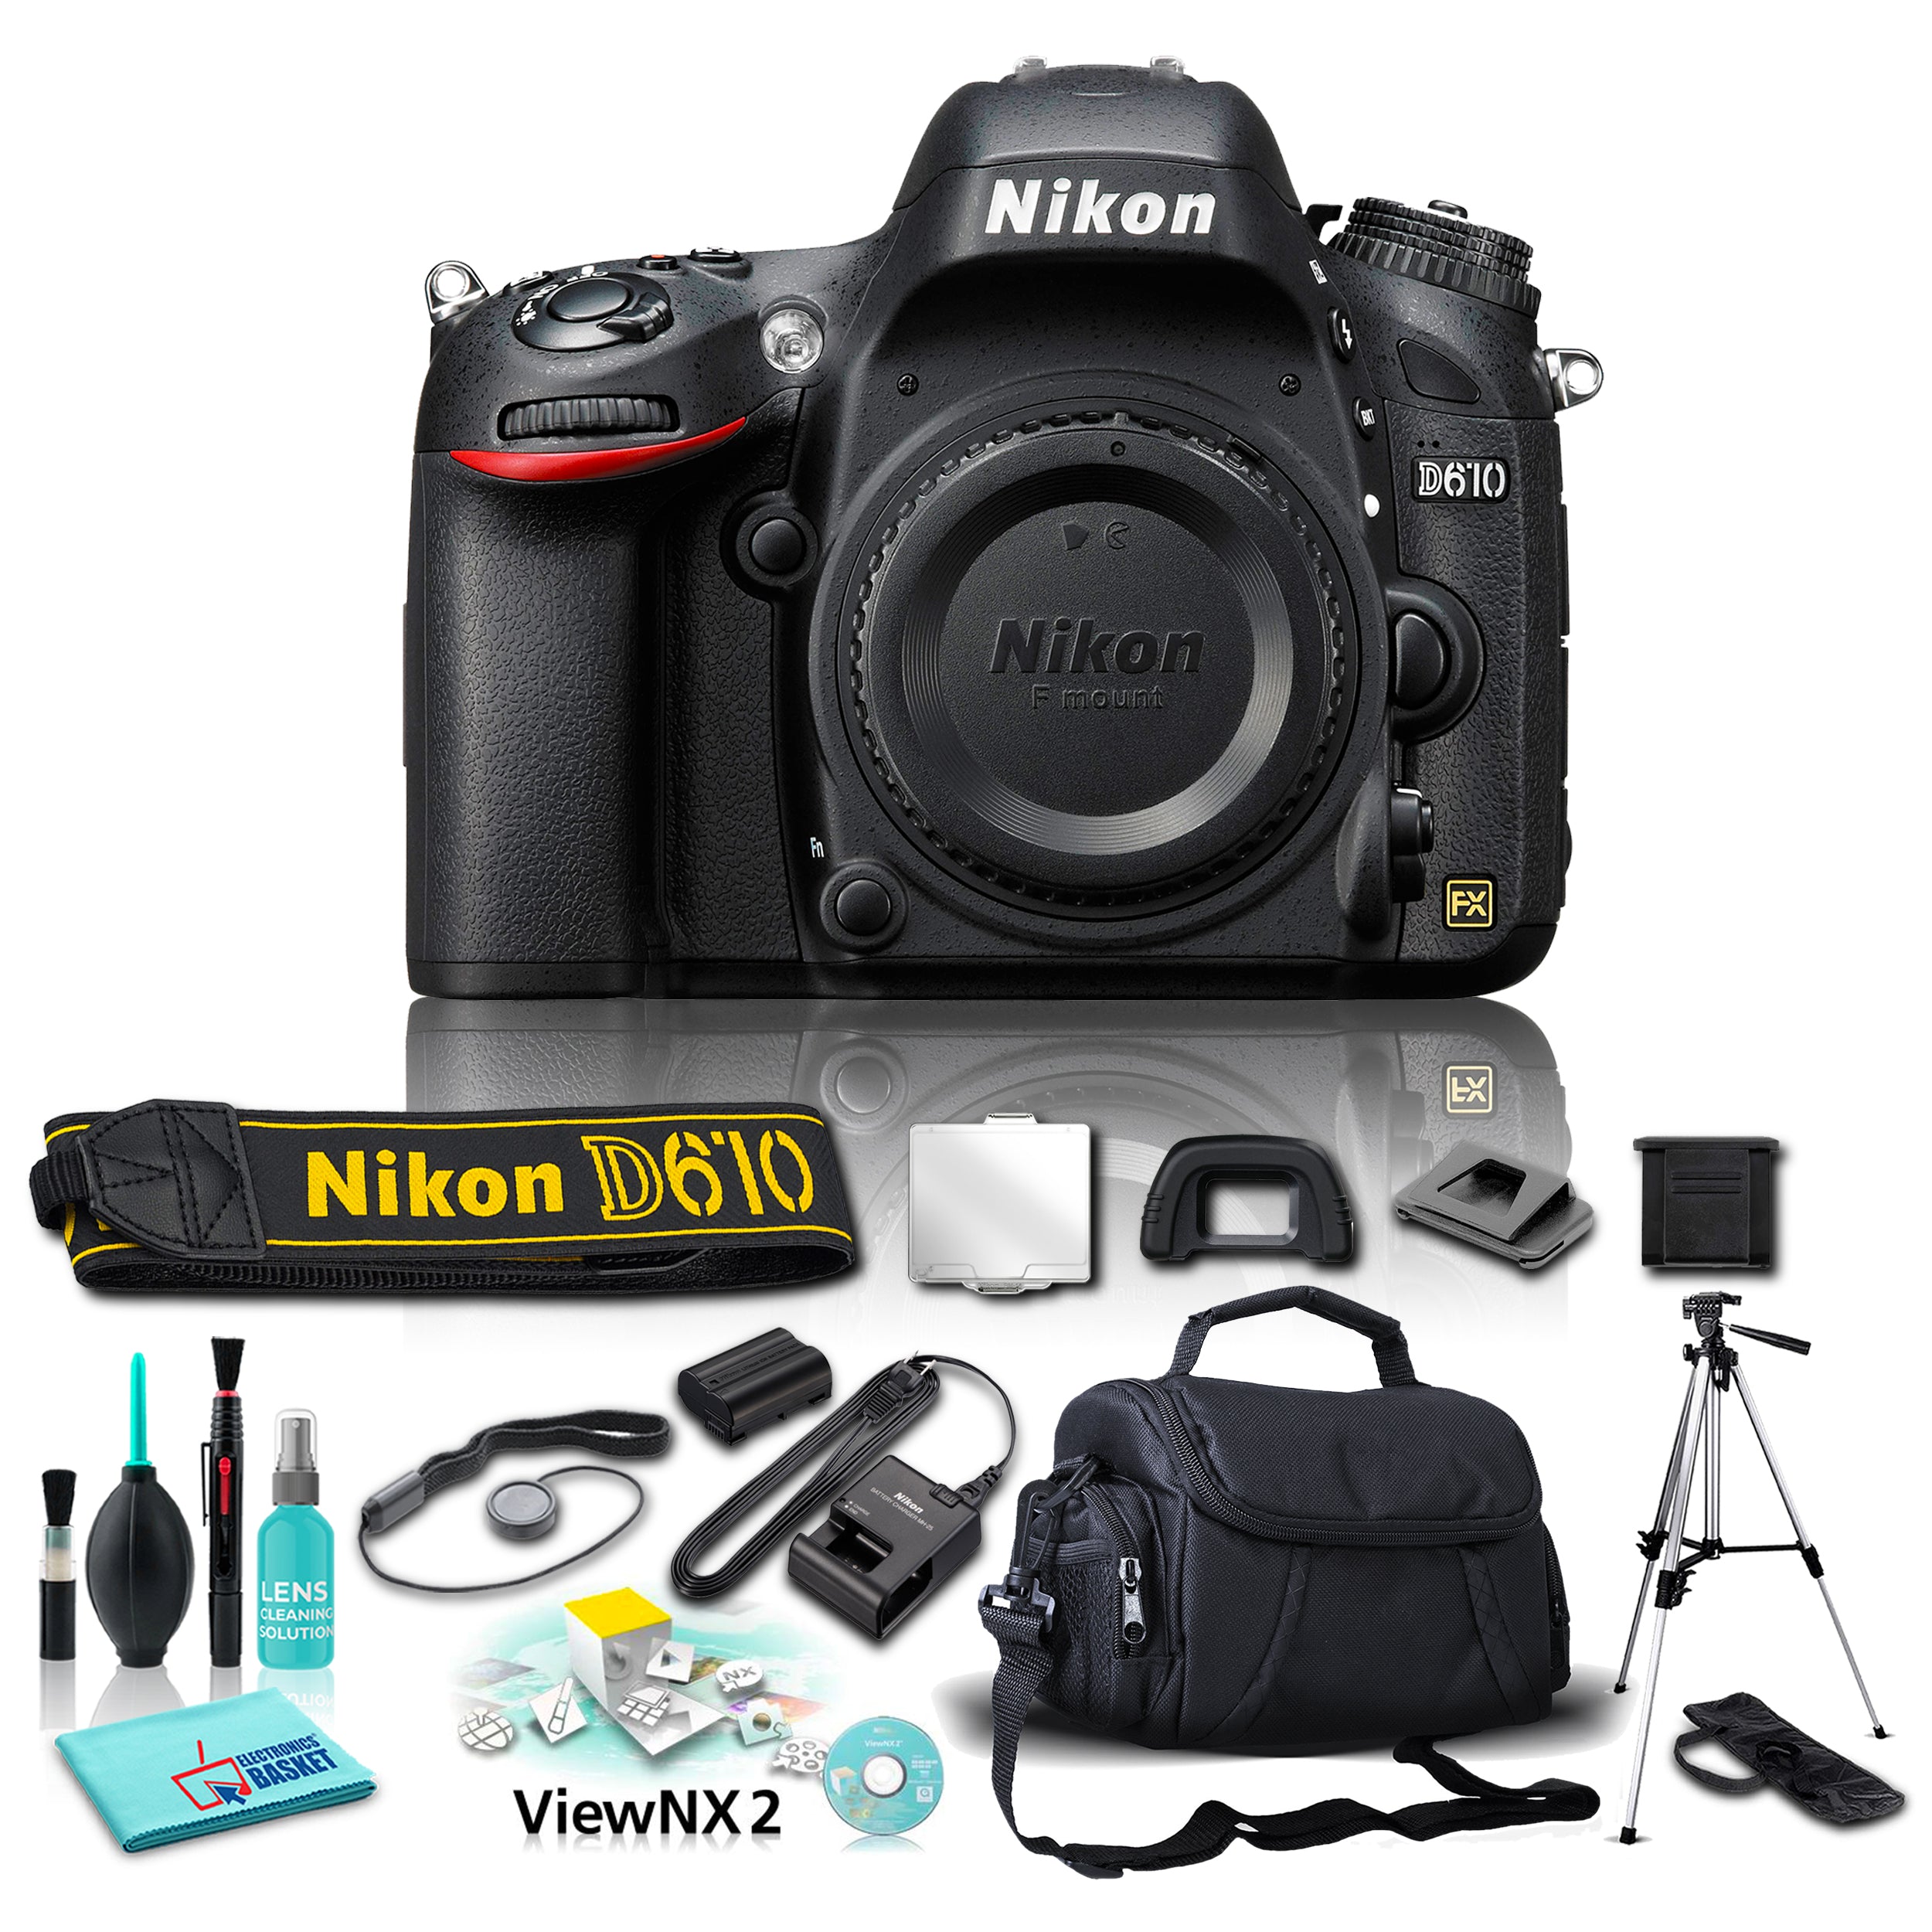 Nikon D610 DSLR Camera (Body Only) Basic Bundle with 5 Piece Accessories